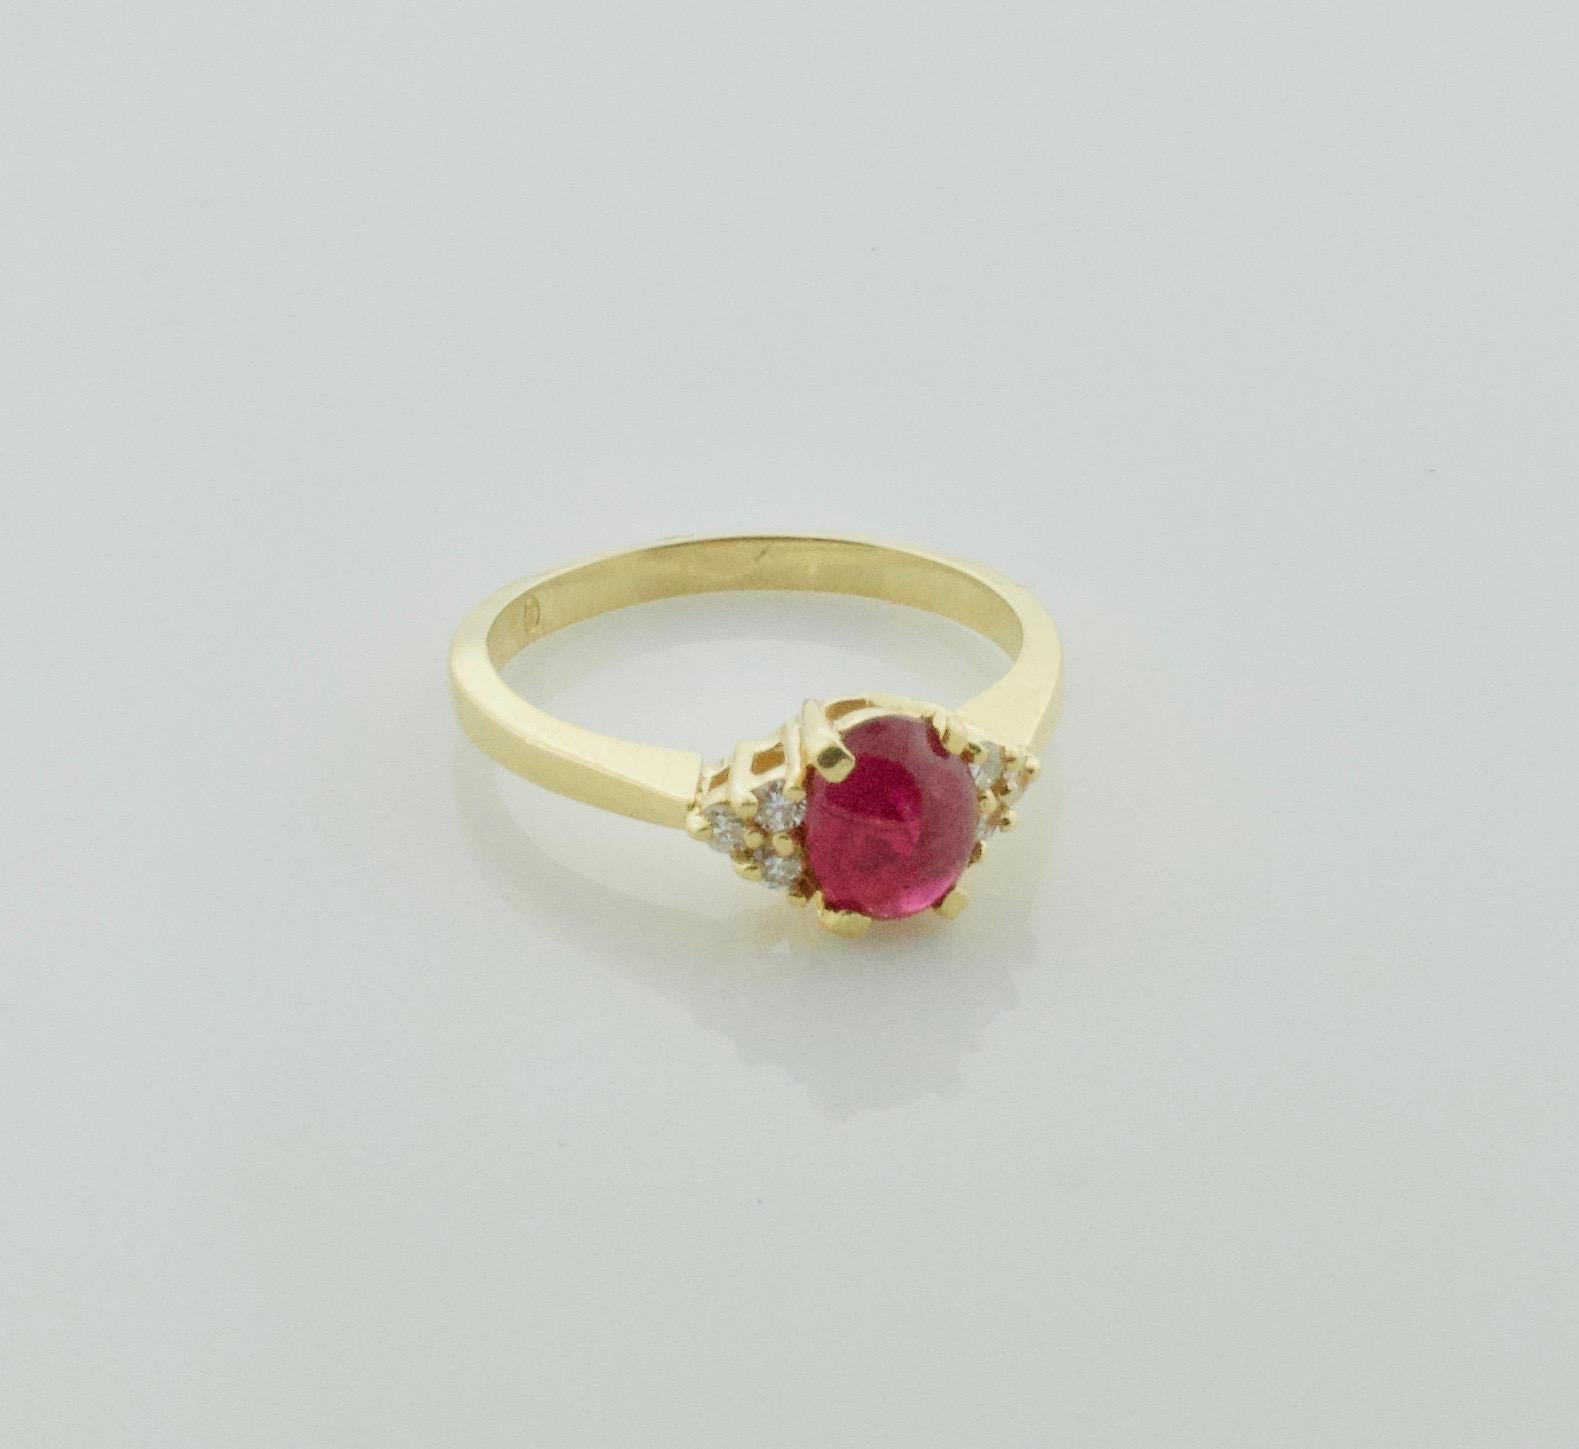 Delightful Cabochon Ruby and Diamond Solitaire Ring in 18k
One Cabochon Ruby weighing 1.12 carats [bright with no imperfections visible to the naked eye]
Six Round Brilliant Cut Diamonds weighing .12 carats [GH- VVS-VS1]
Currently Size 6.5 Can Be